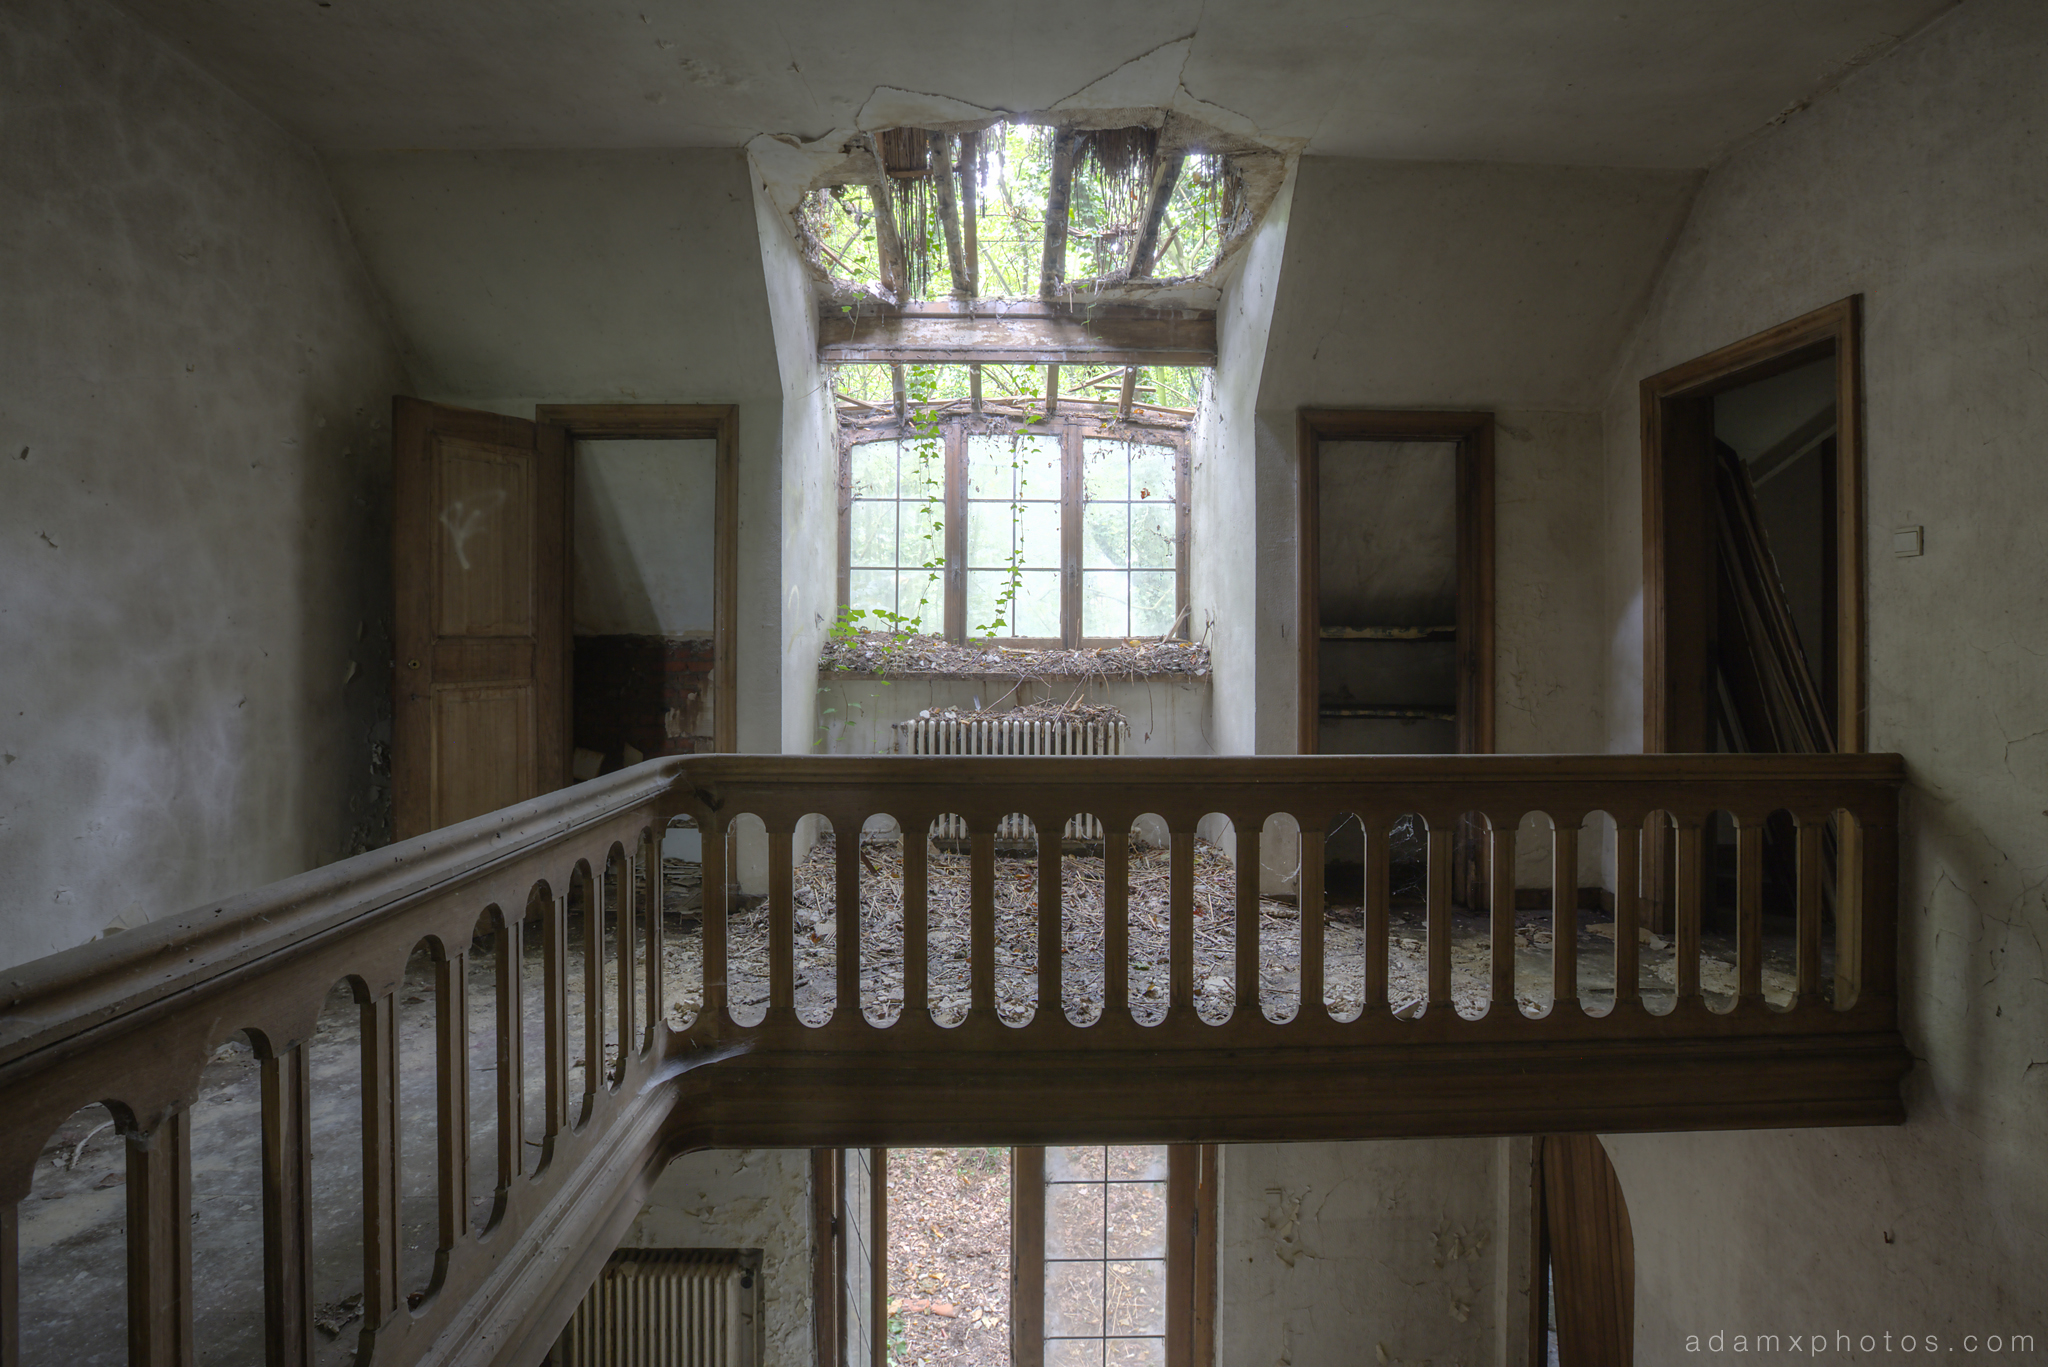 Upstairs landing bannisters roof windows hole Adam X Urbex UE Urban Exploration Belgium Villa Maison SS House Townhouse abandoned derelict unused empty disused decay decayed decaying grimy grime collapsing overgrown